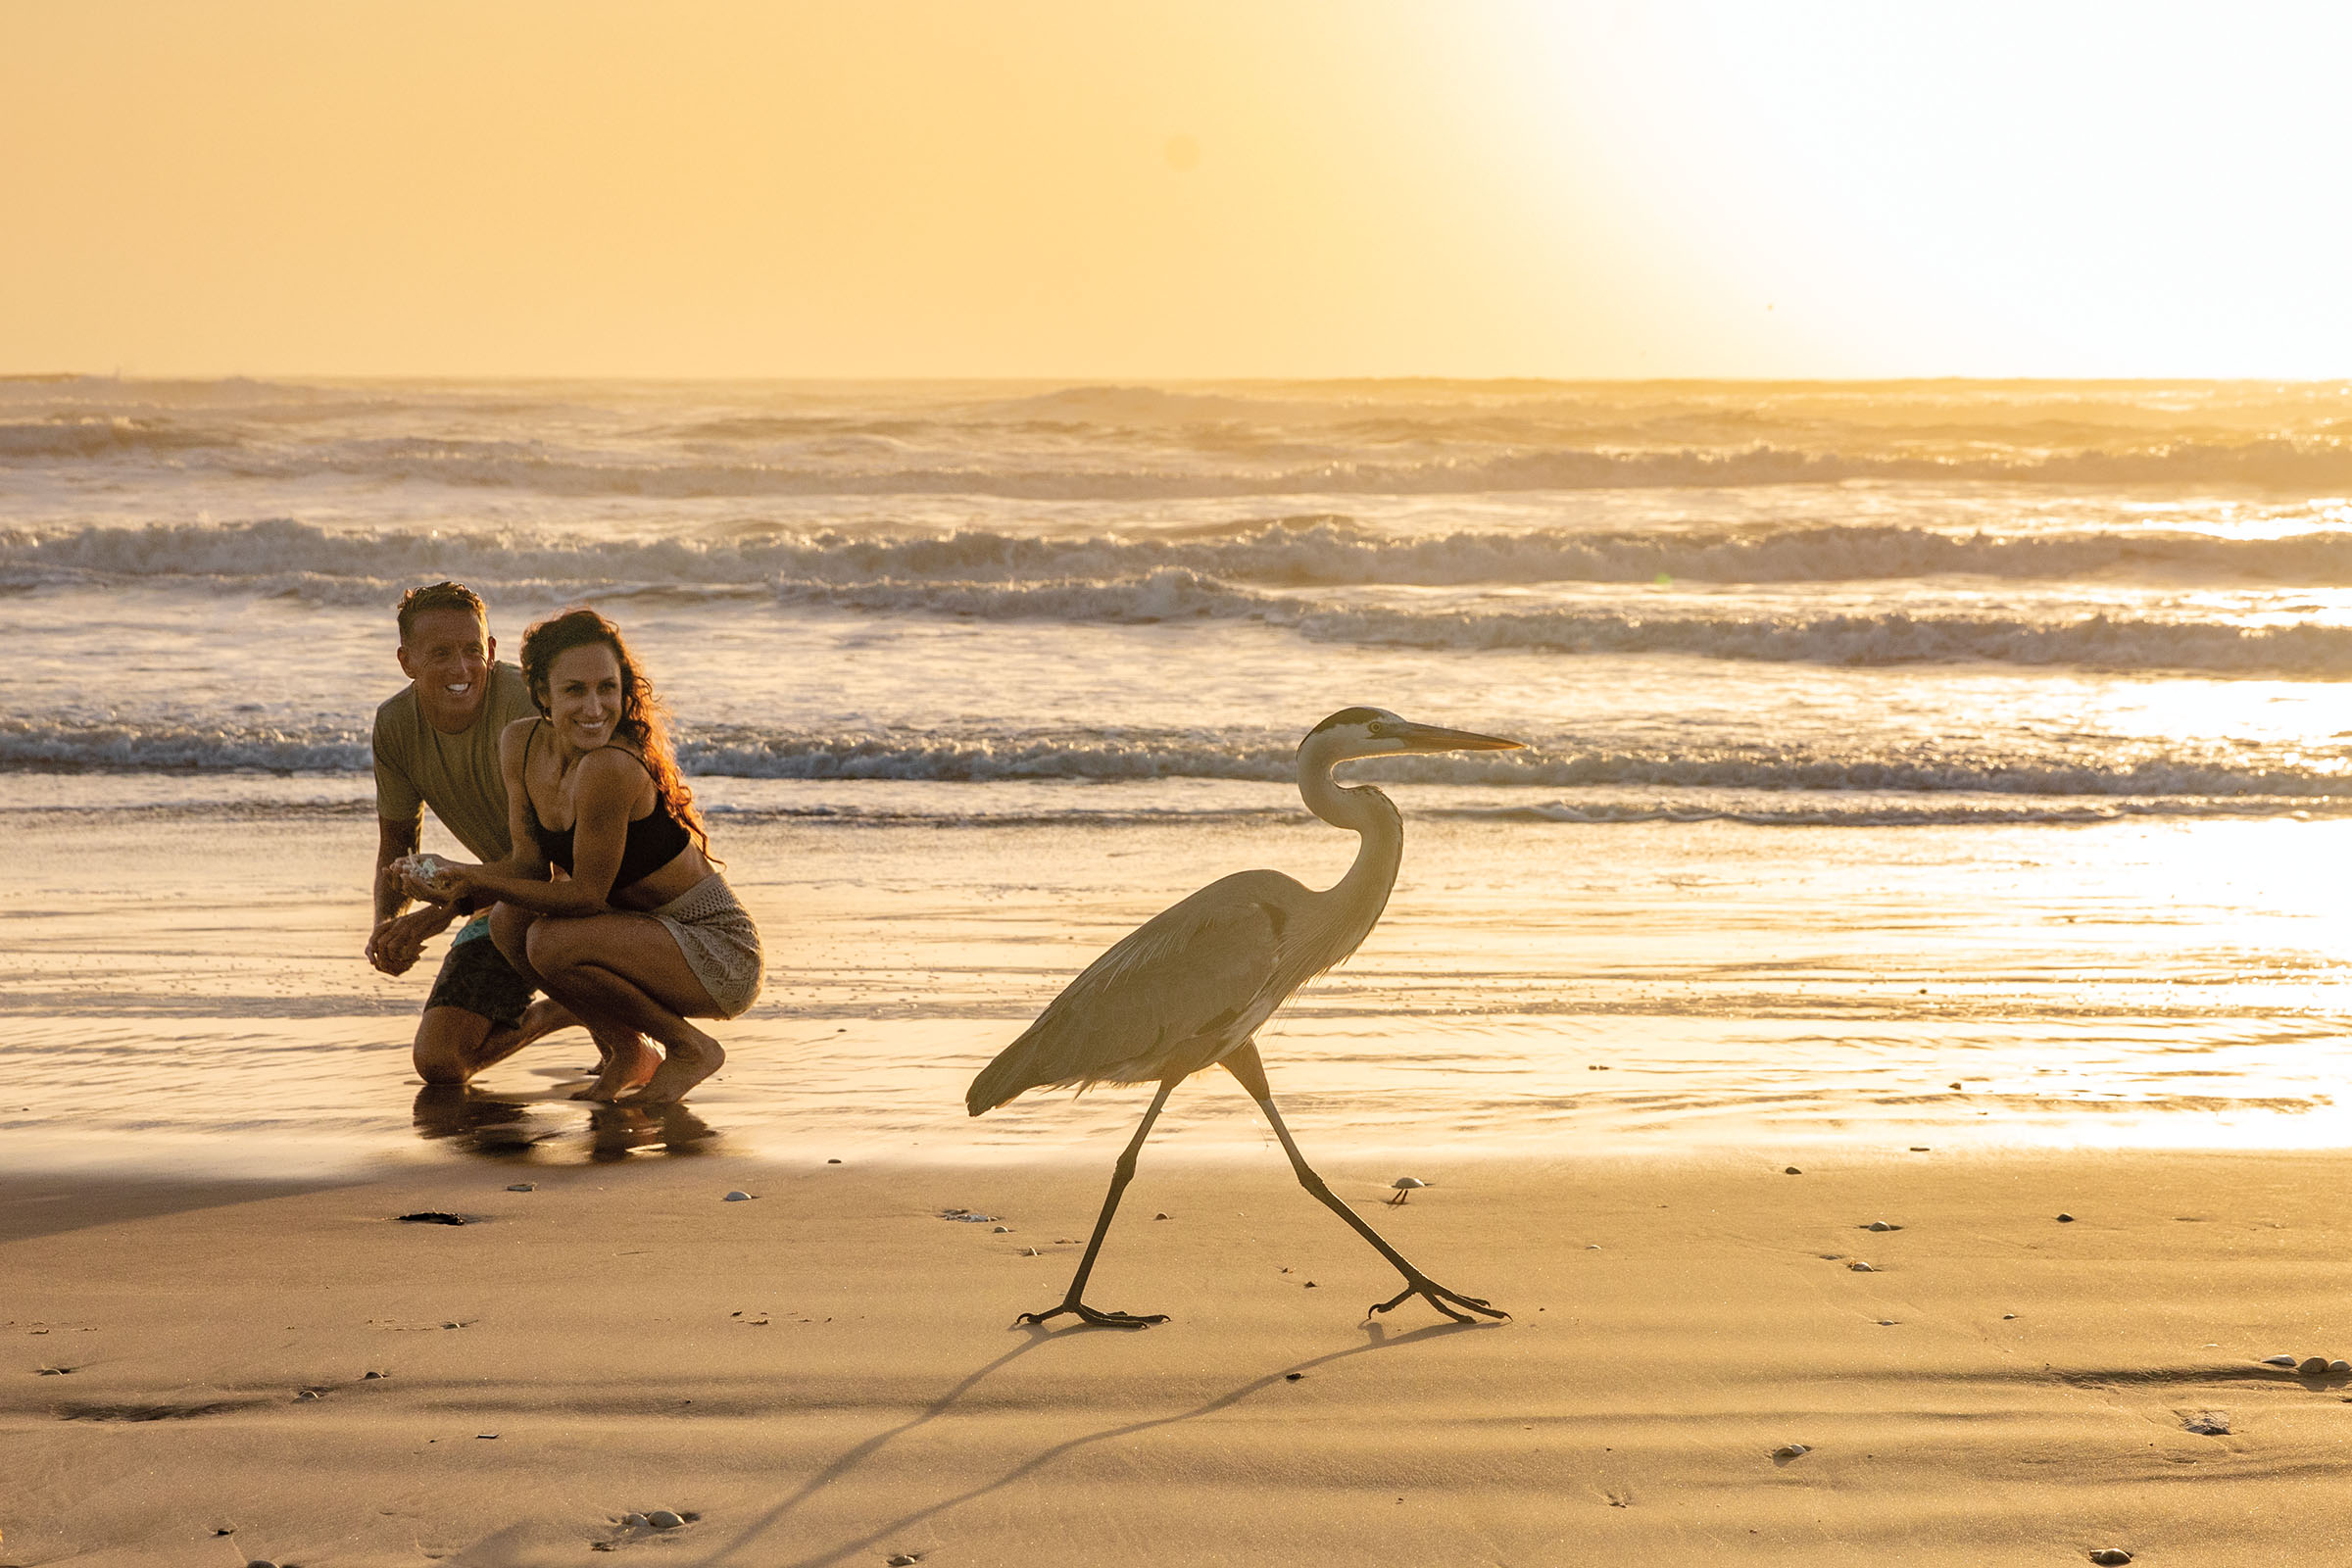 Two people on the beach admire a tall bird in golden light